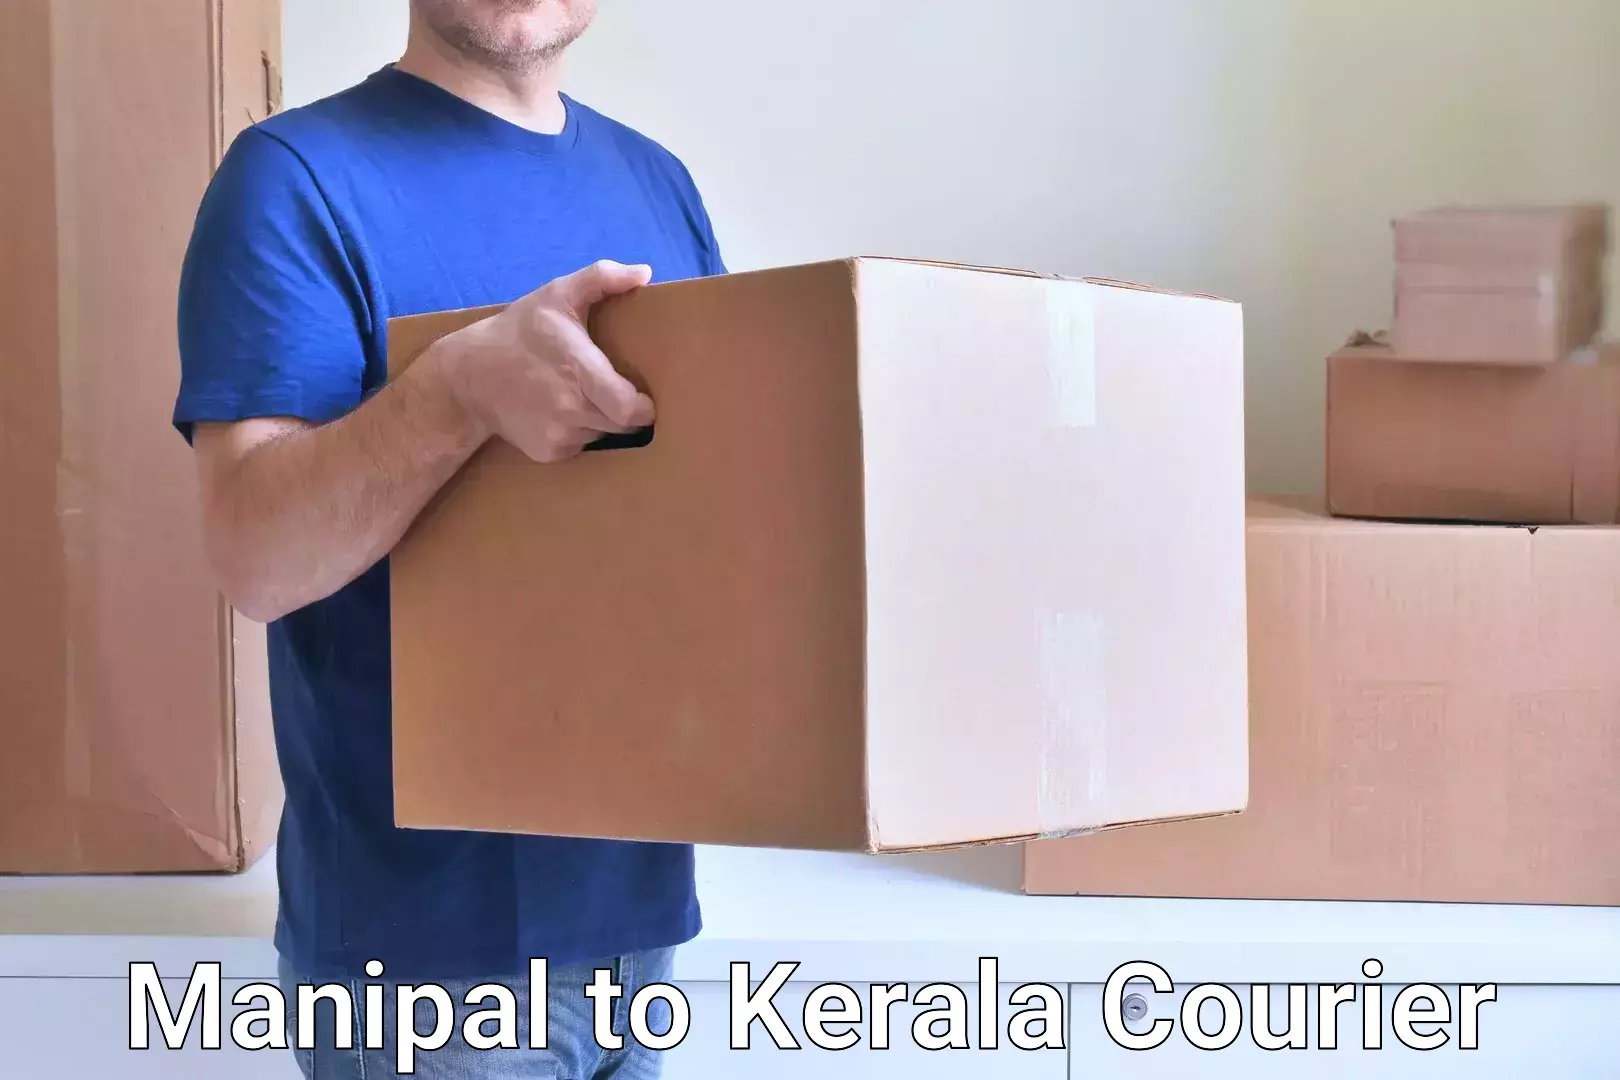 Flexible delivery schedules Manipal to Kottayam